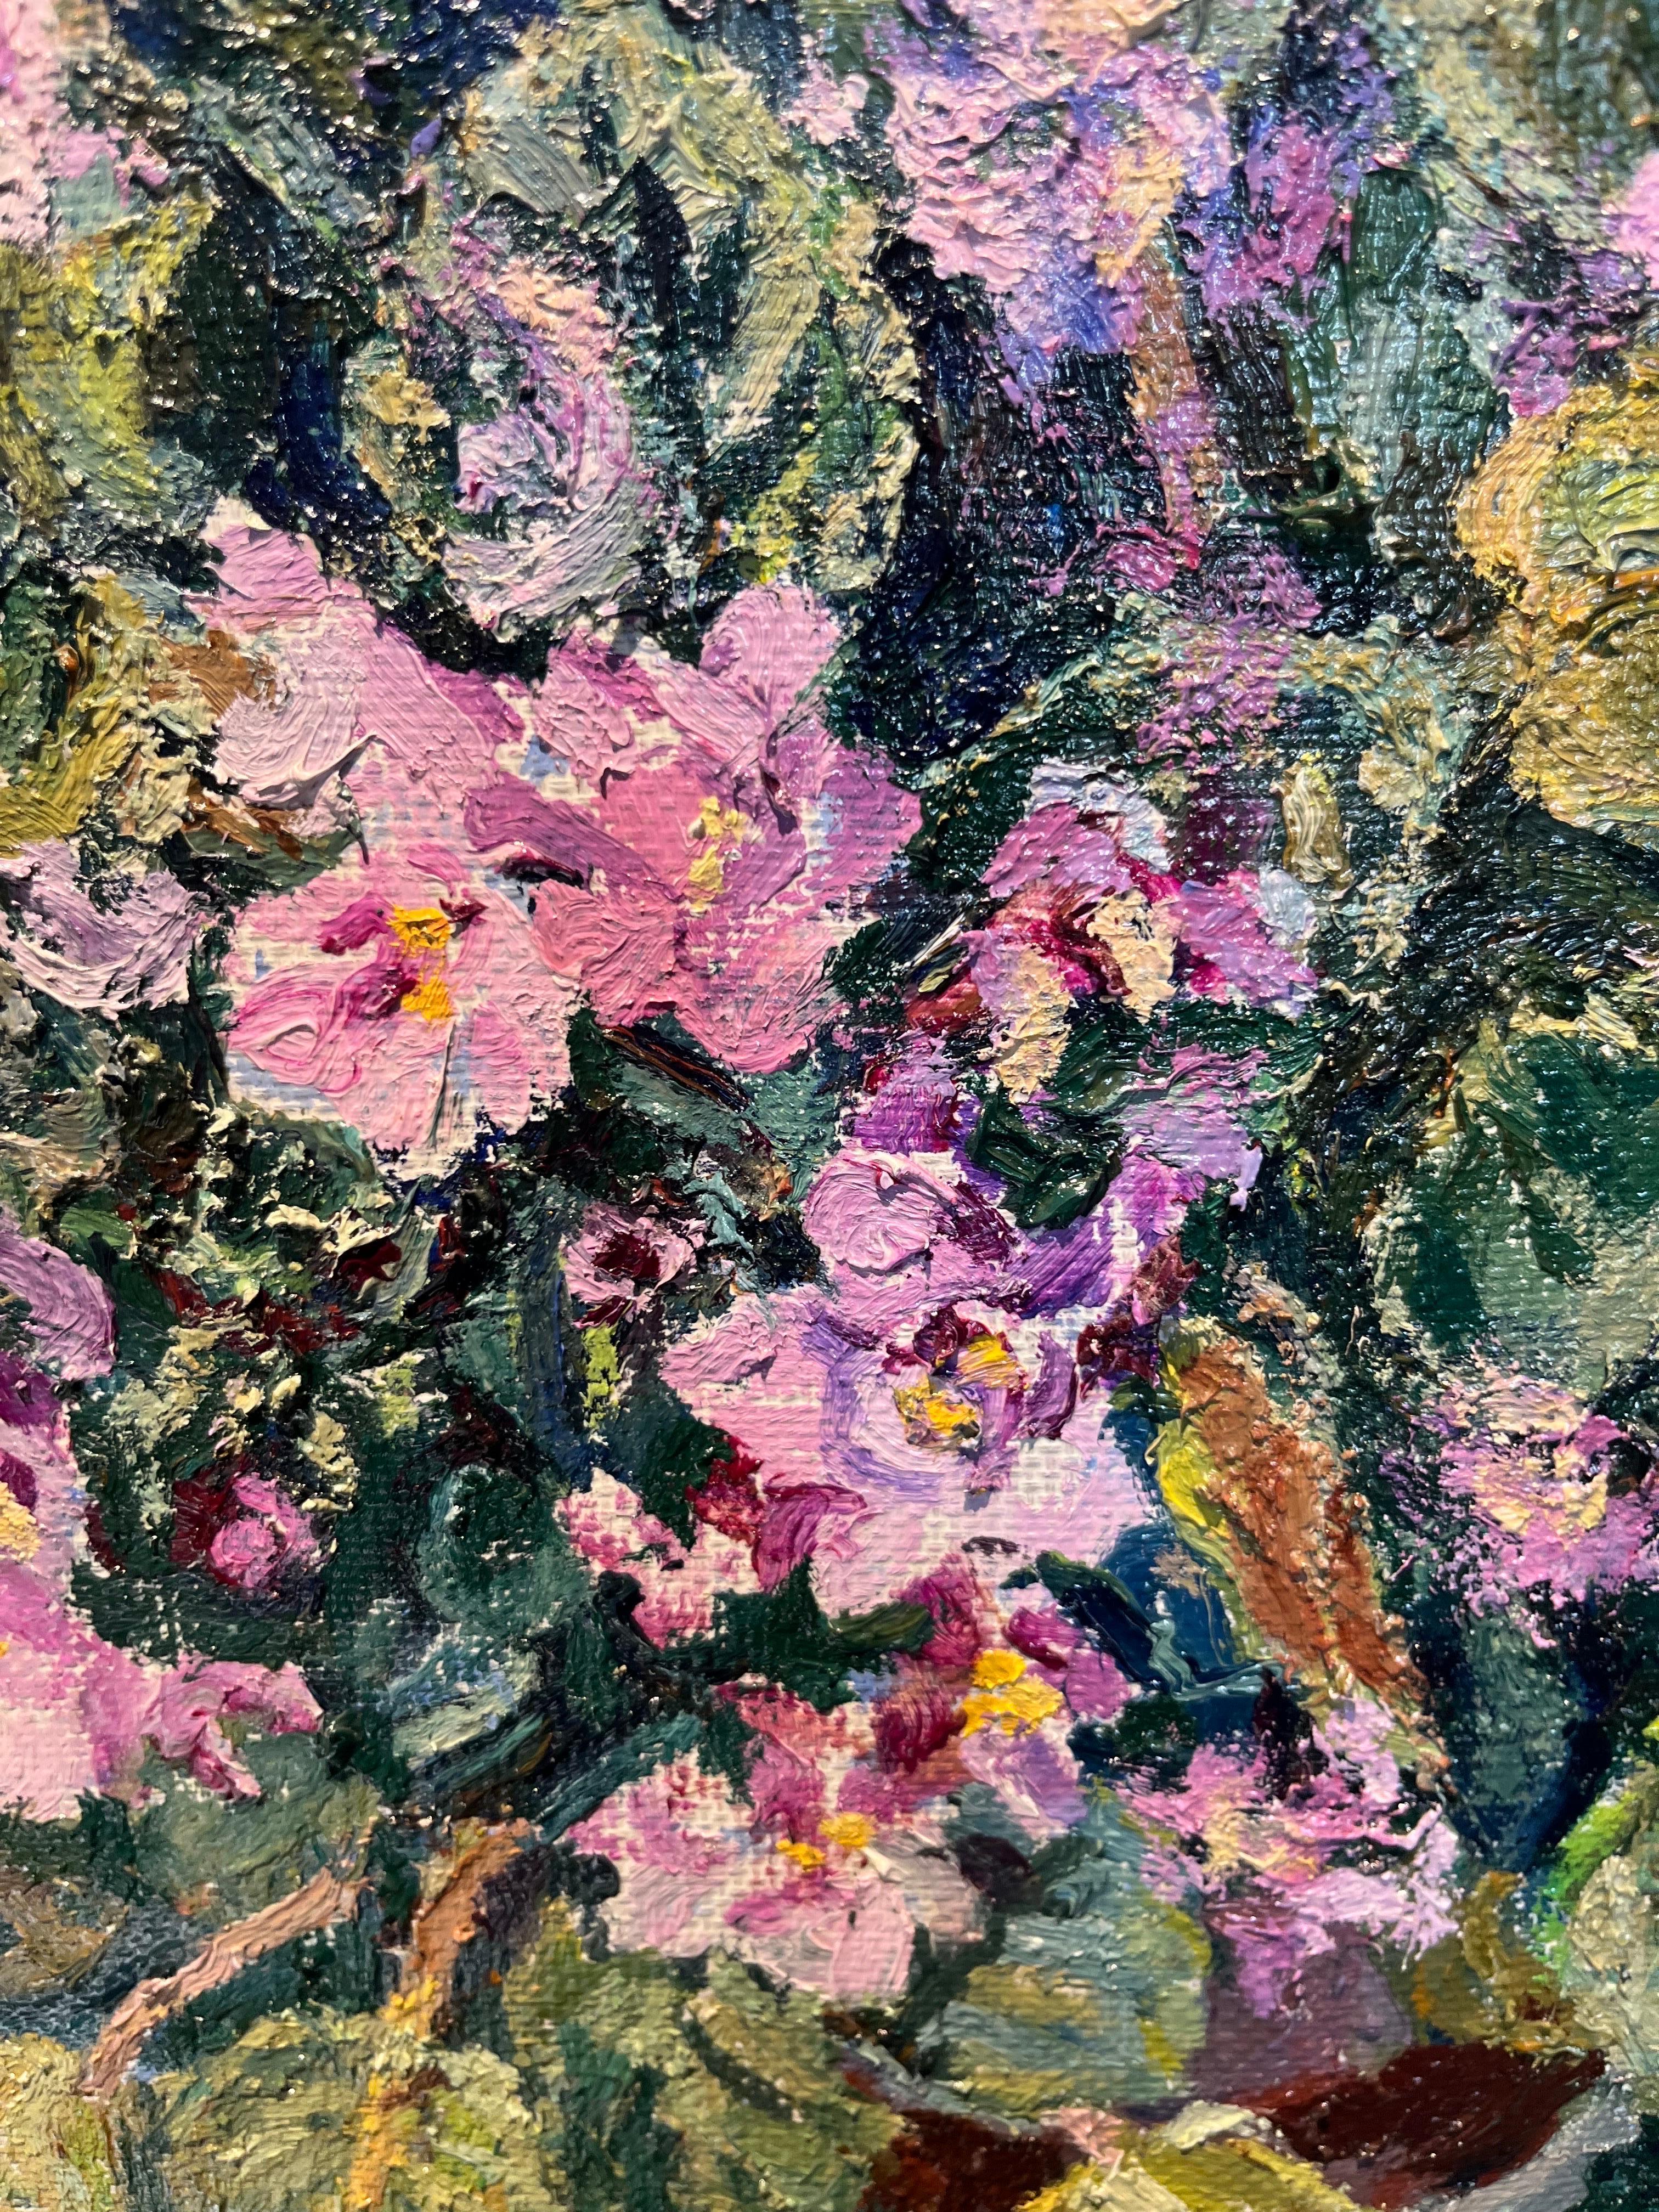 Purple, Green, Flowers
MAYA KOPITZEVA    (Gagra, Georgia, 1924 - 2005)

Maya Kopitzeva’s works have been acquired by the Russian Ministry of Culture, by the Foundation for the Russian Culture, by various collectors in Europe, Japan, United States